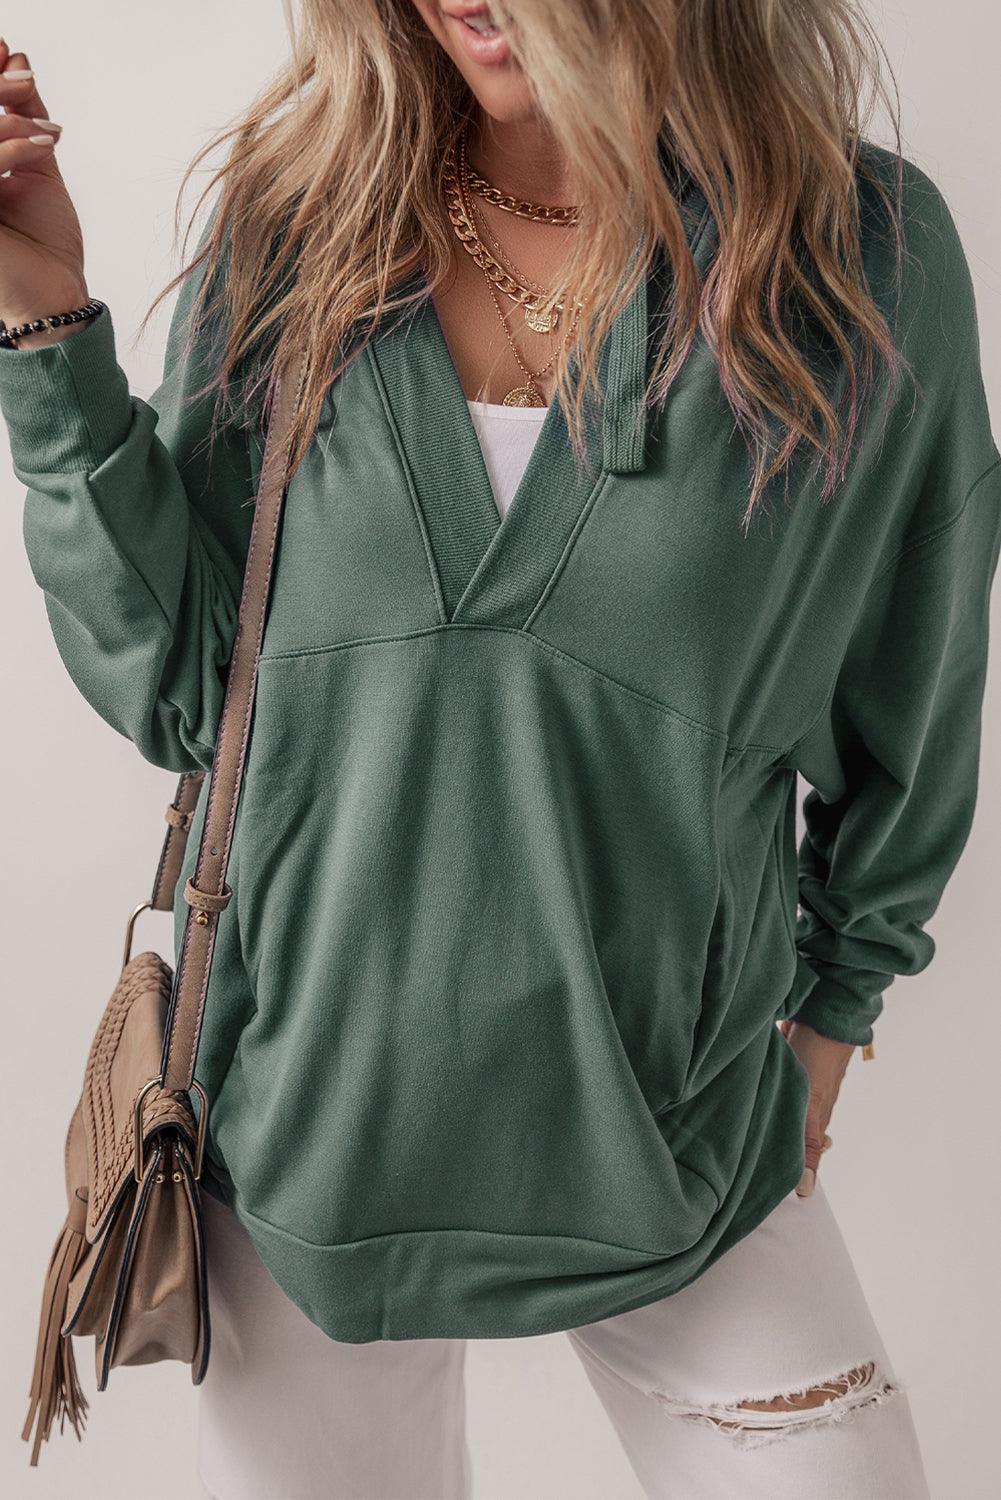 Sea Green Casual V Neck Drawstring Hoodie - God's Girl Gifts And Apparel